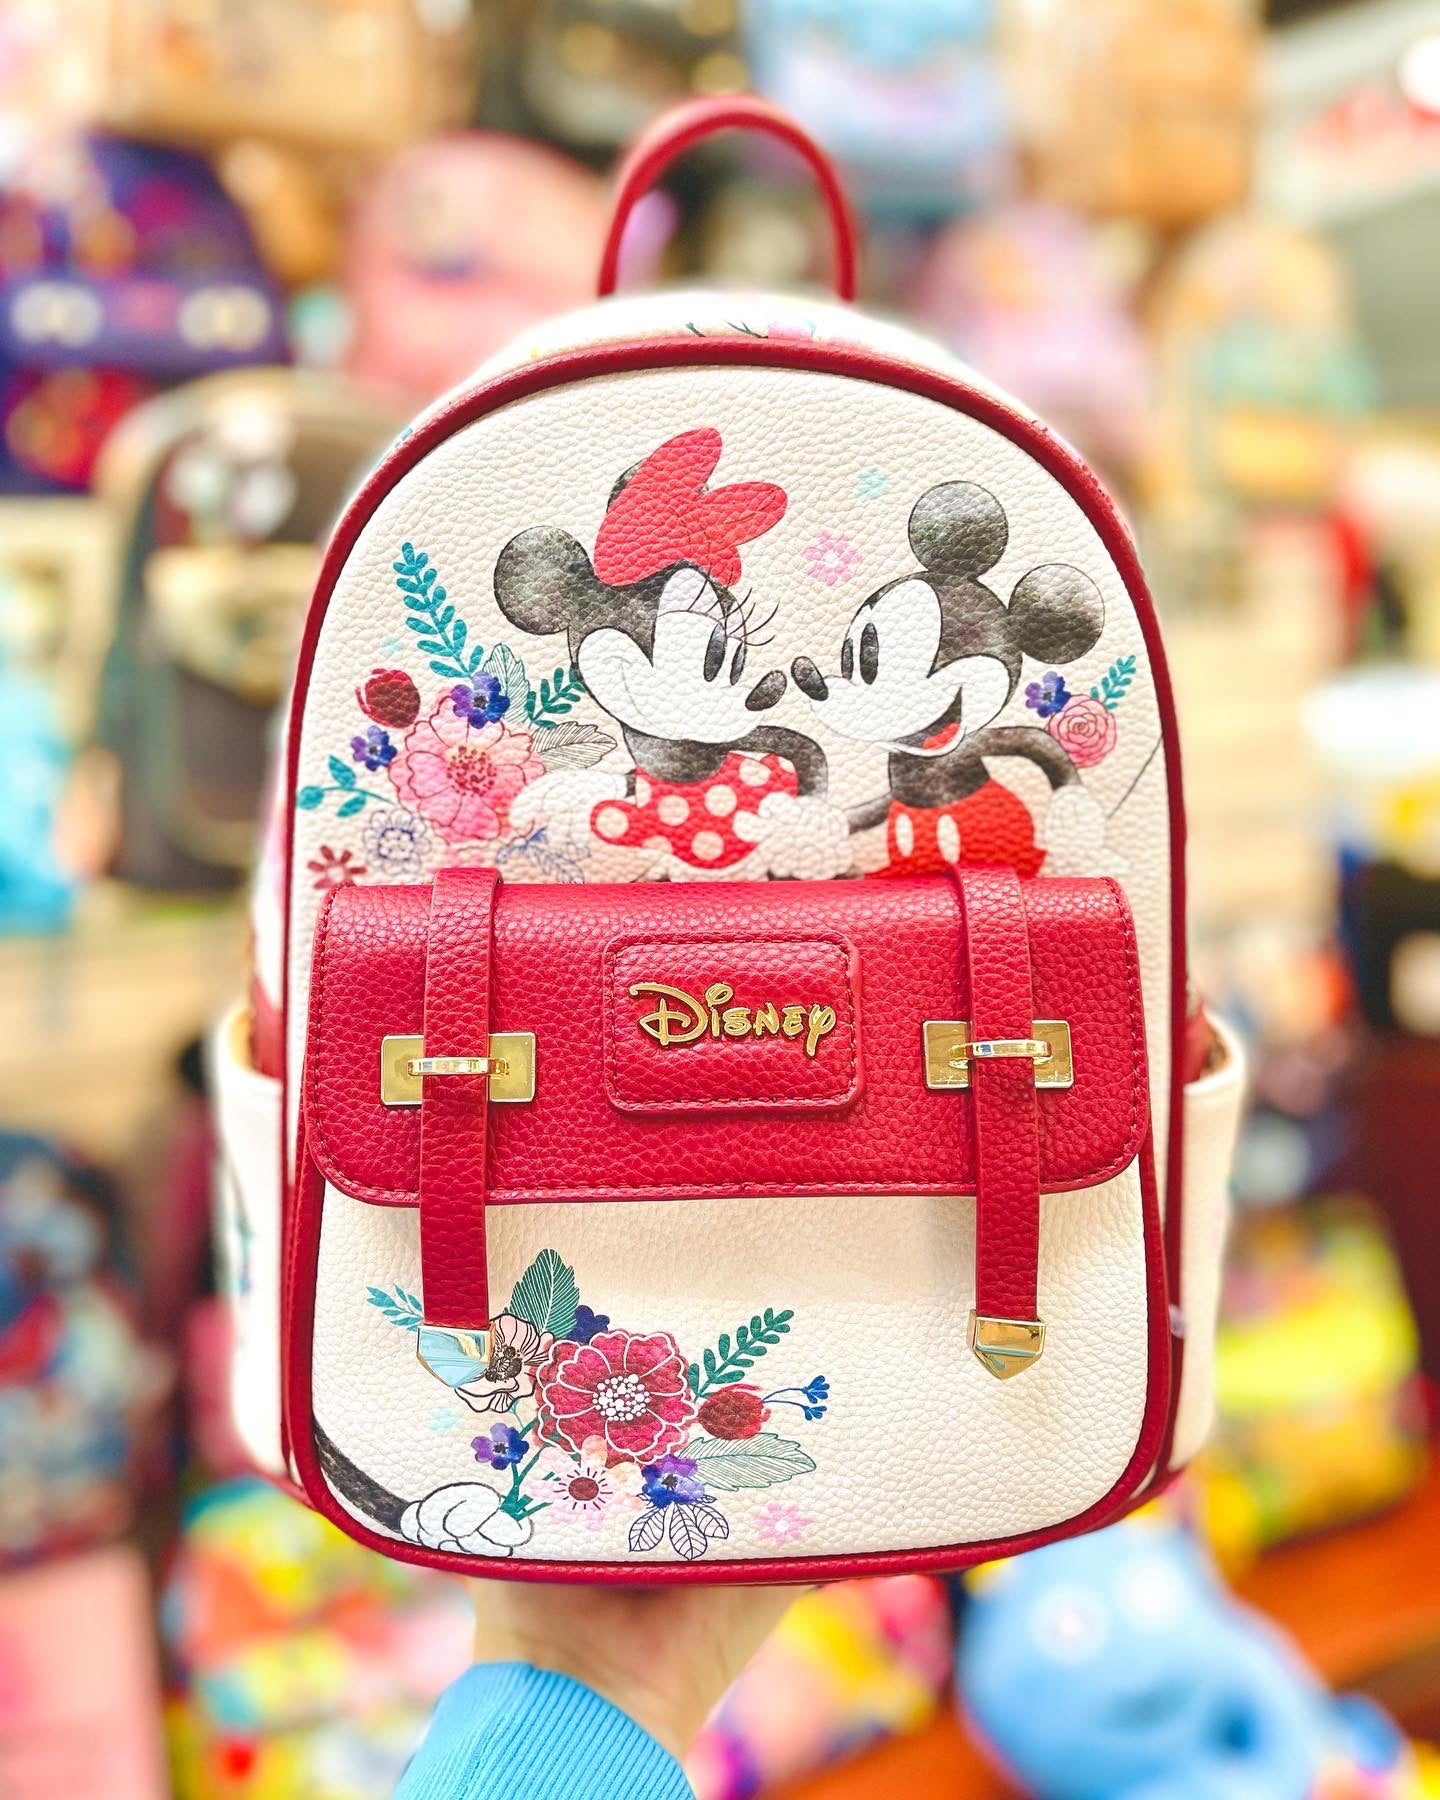 Disney Mickey and Minnie Mouse 11-inch Vegan Leather Mini Backpack